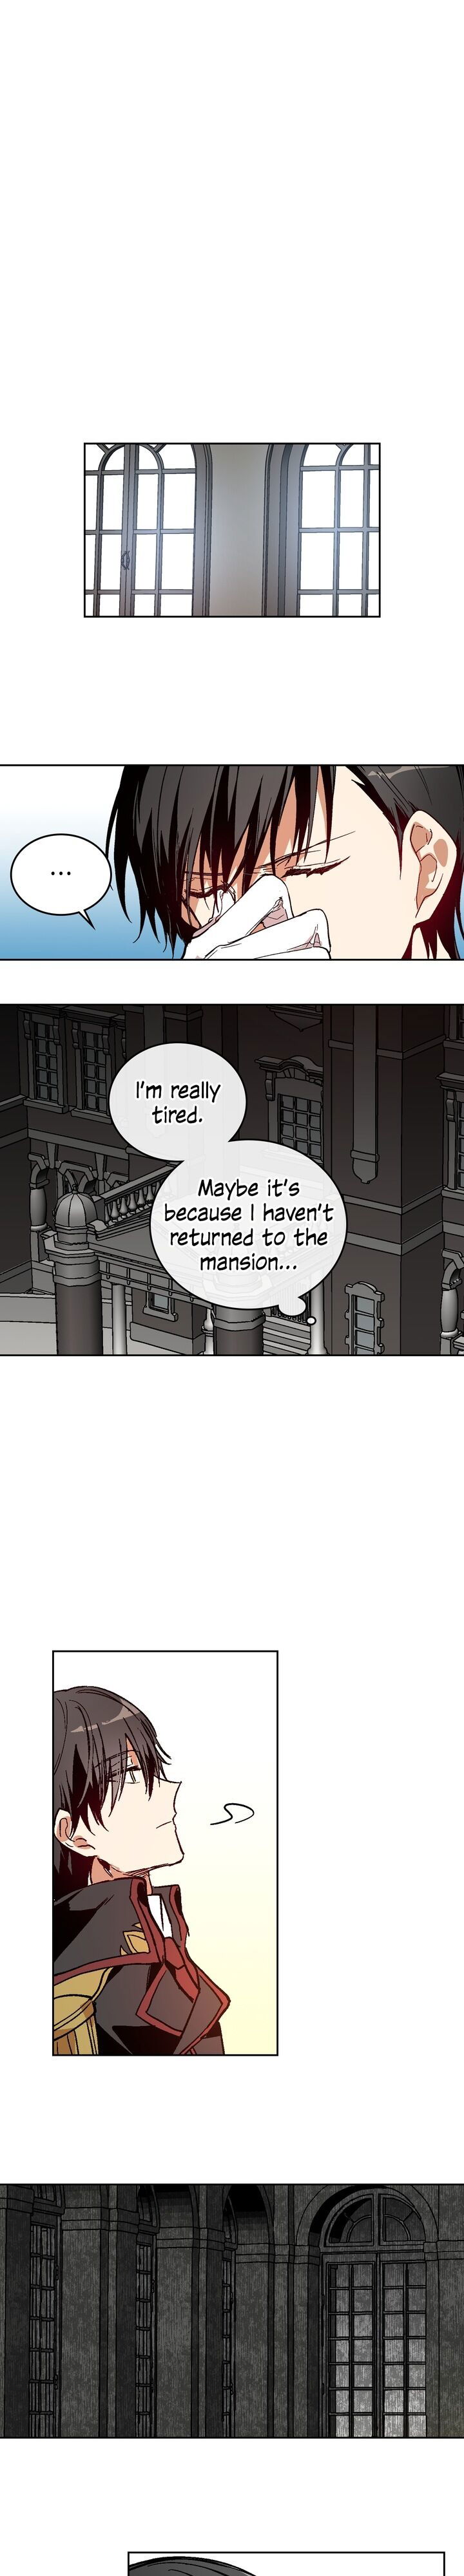 The Reason Why Raeliana Ended Up at the Duke's Mansion Chapter 054 page 8